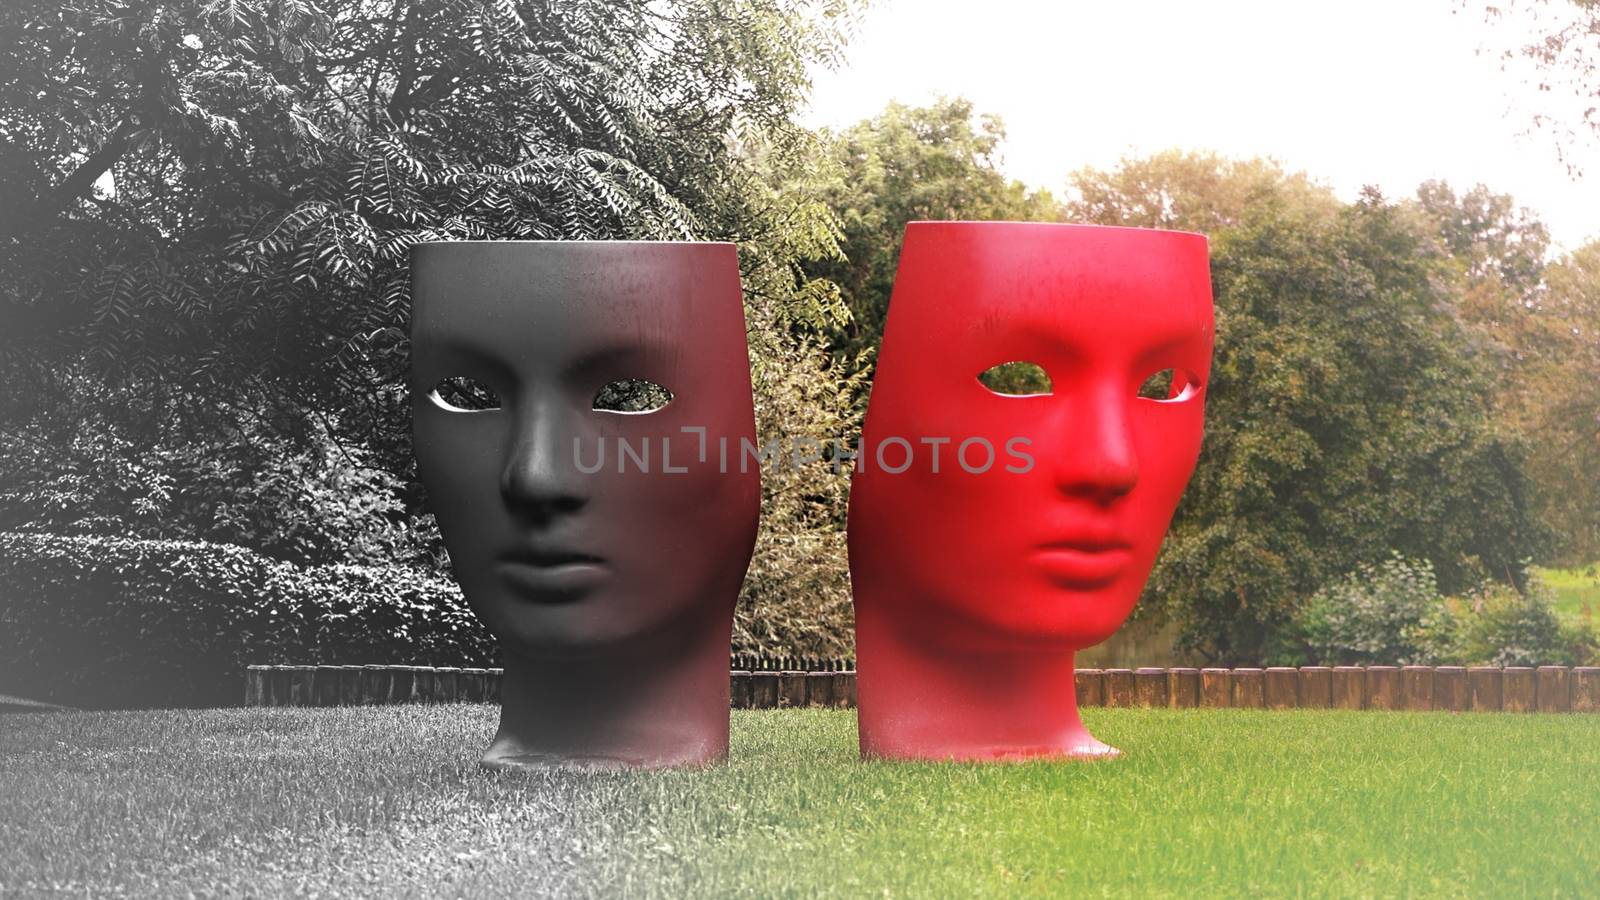 Black and red mask face with landscape background. High quality photo